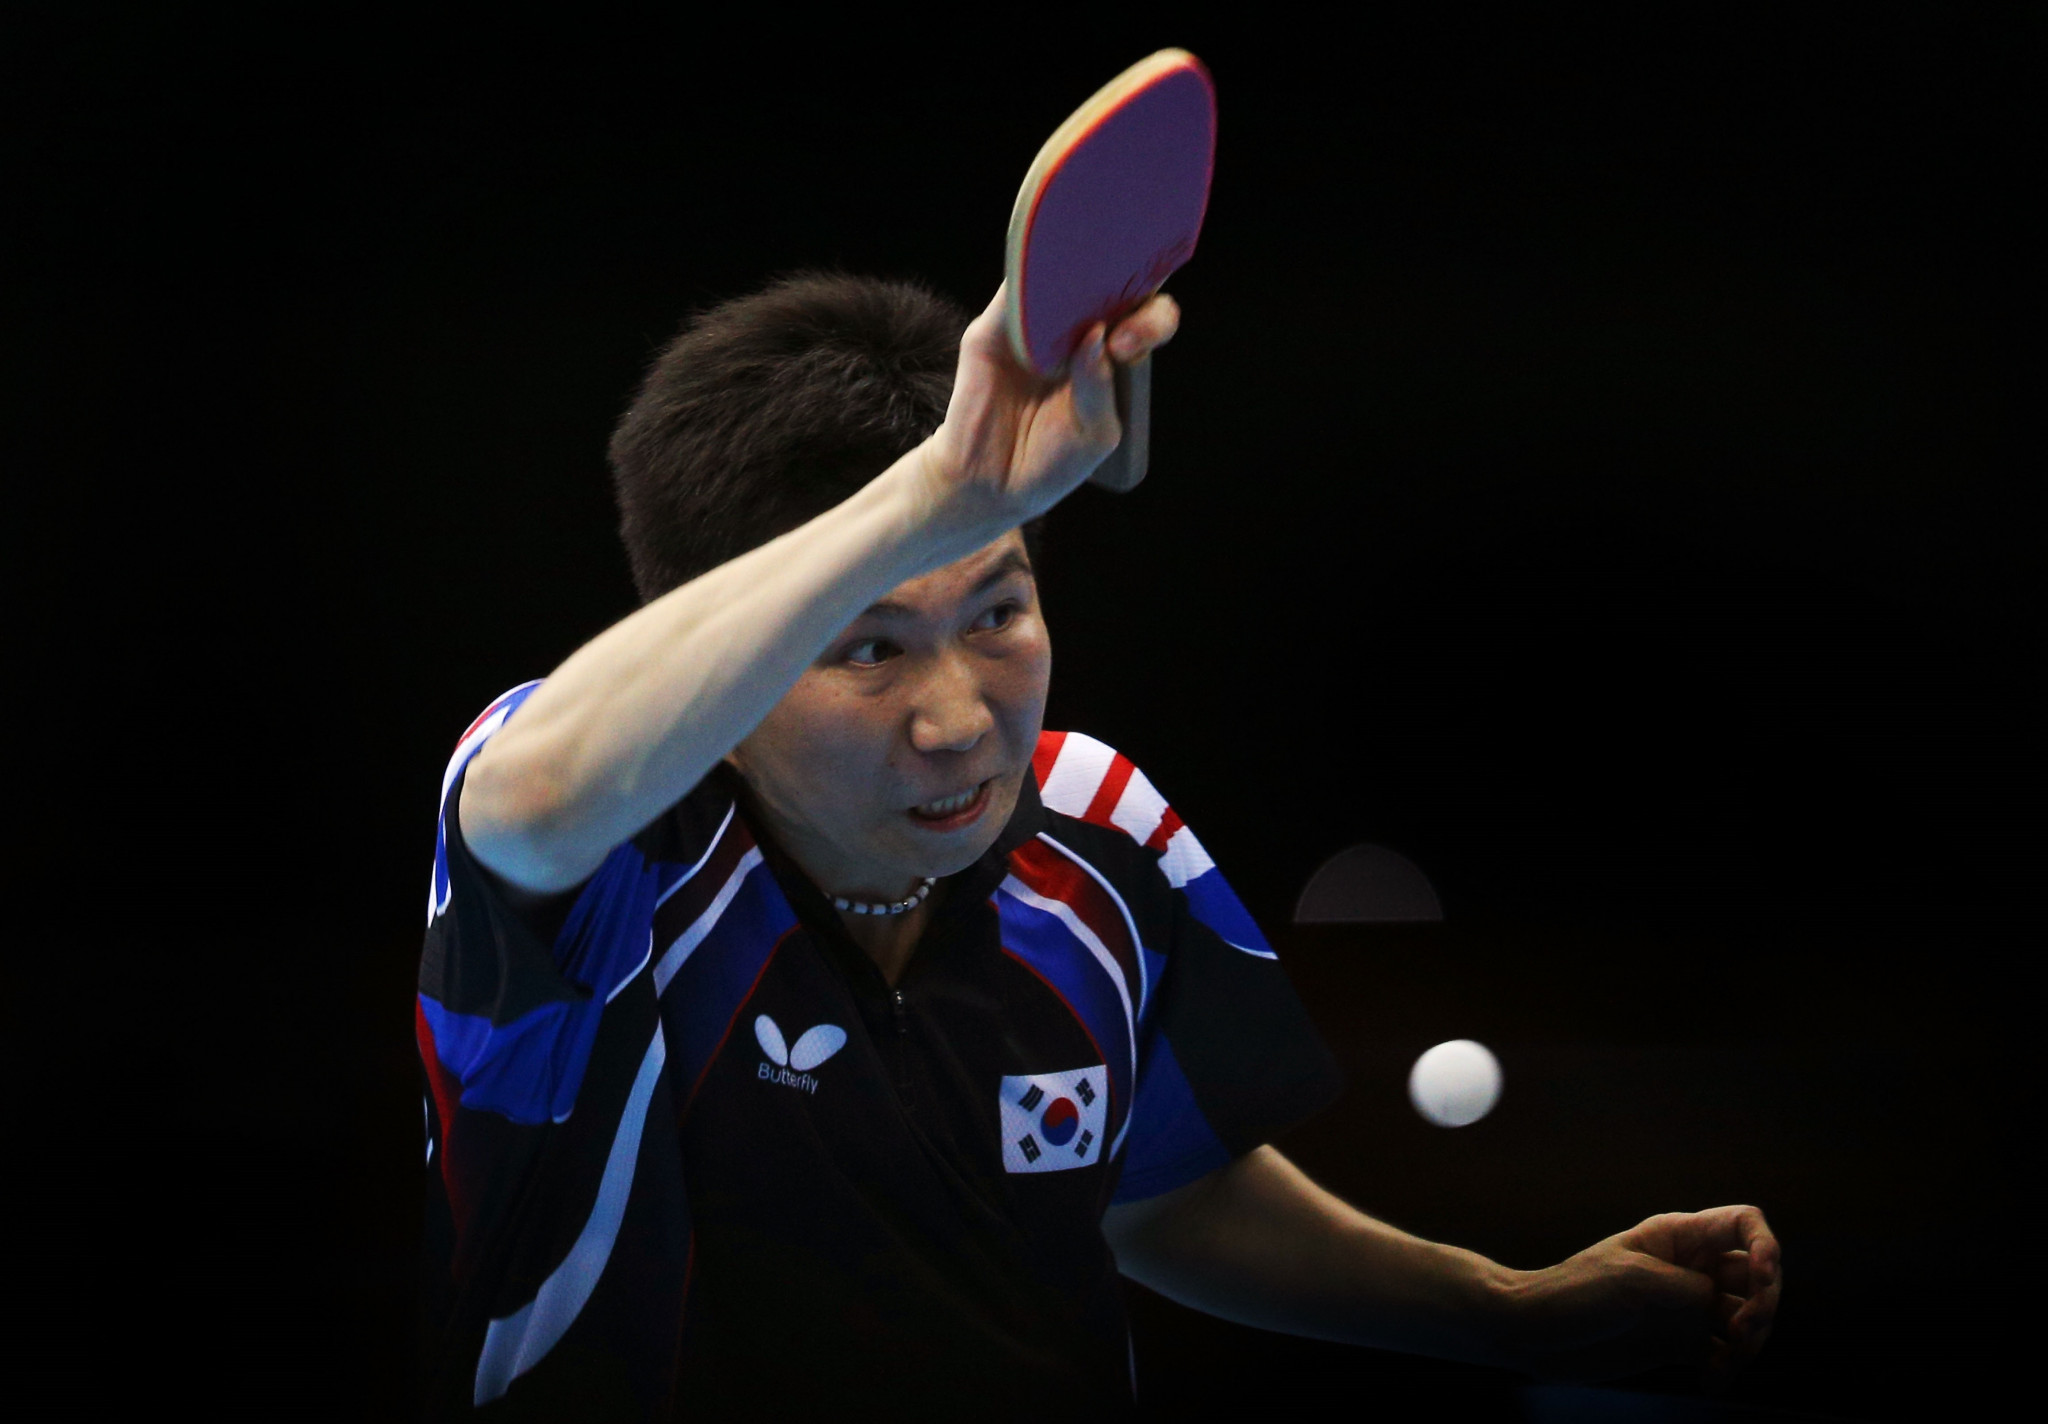 Ryu among participants as two Koreas, China and Japan celebrate Olympic Day with friendly table tennis event